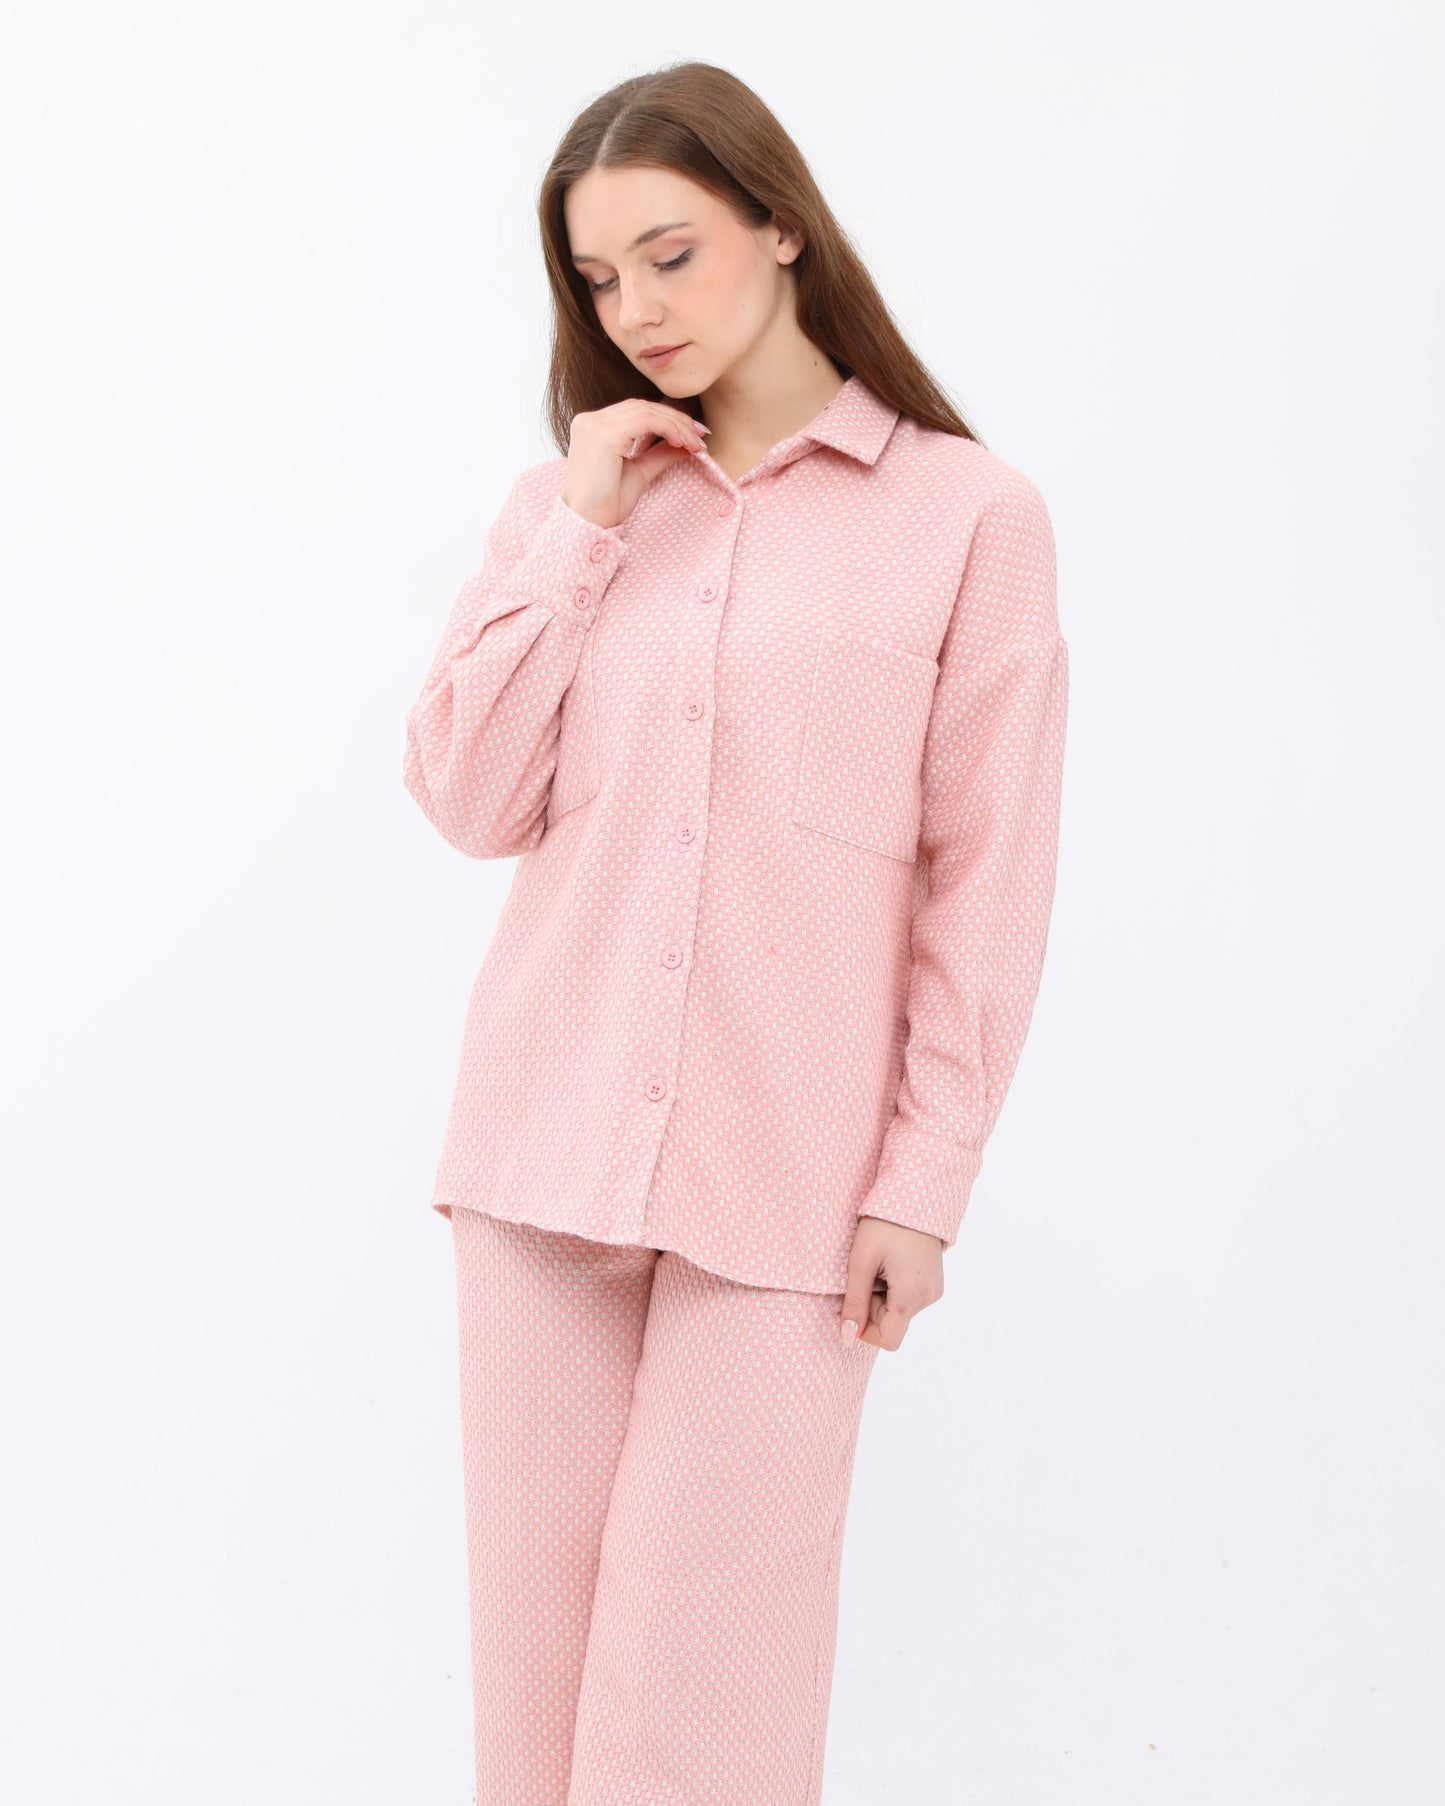 French Pink Chanel Suit